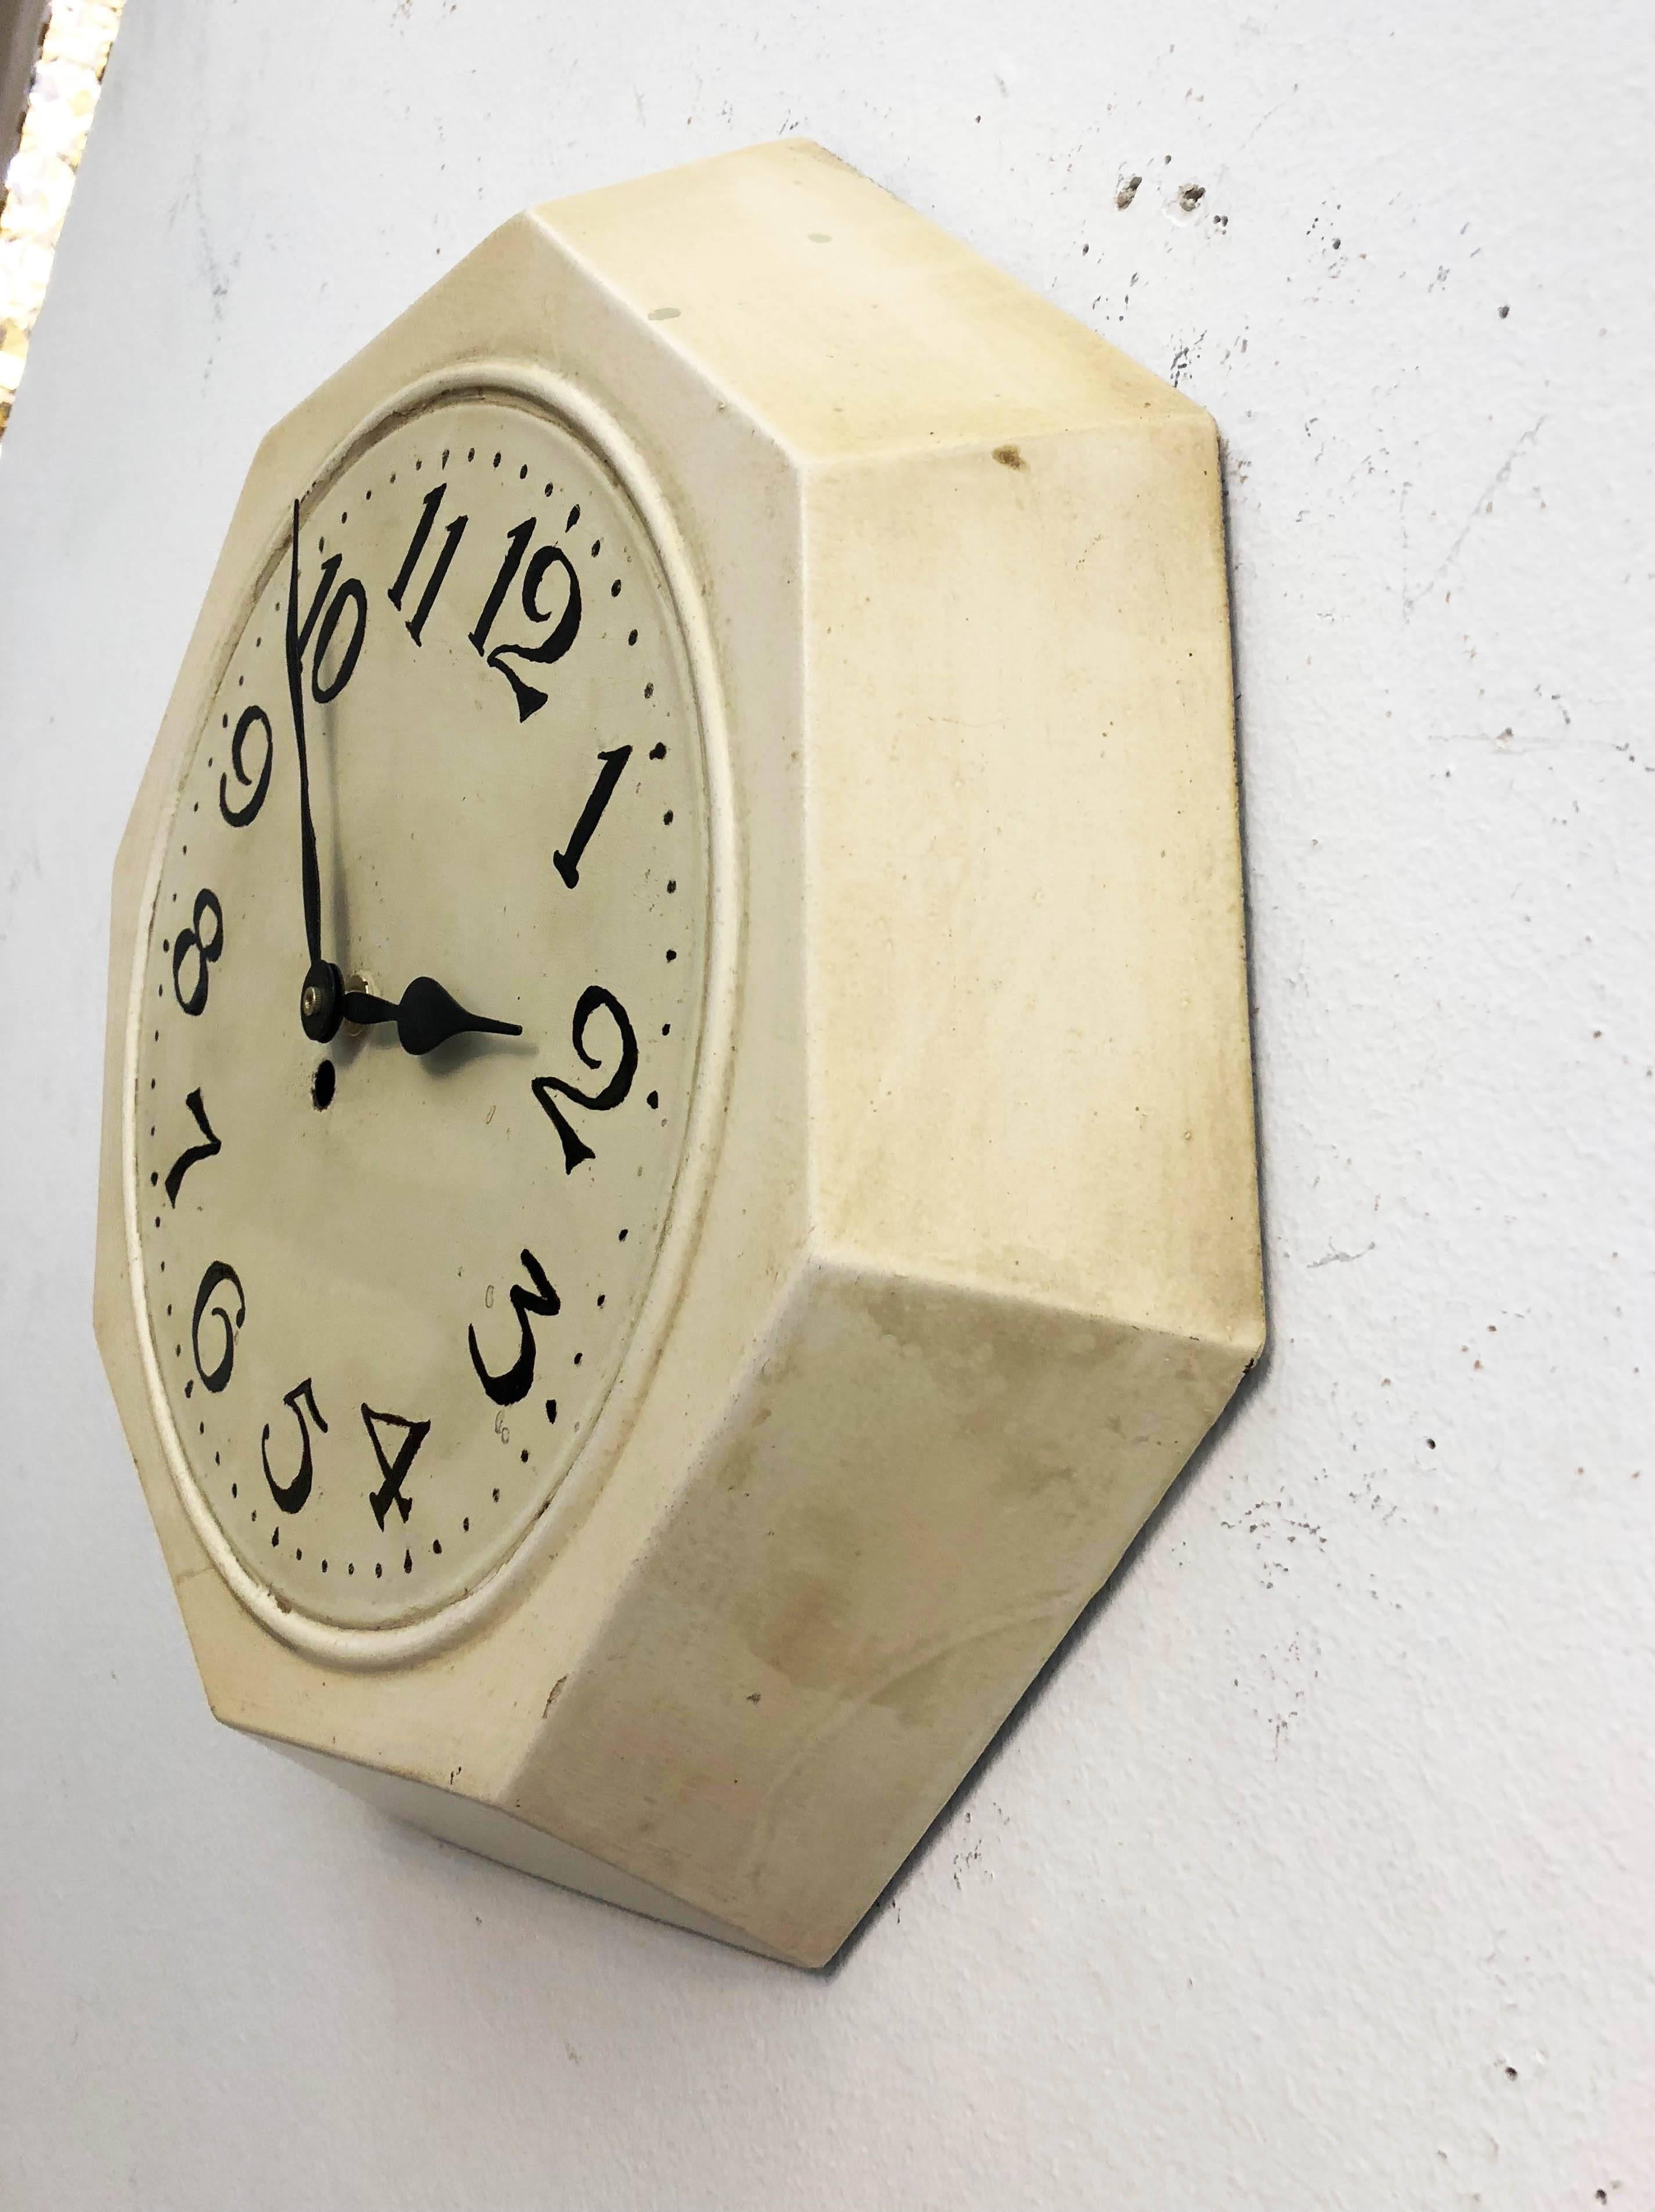 Steel painted made in Austria in the 1930s in the style of Adolf Loos.
Formerly a station or factory slave clock, it is now fitted with a modern quartz movement with a battery.